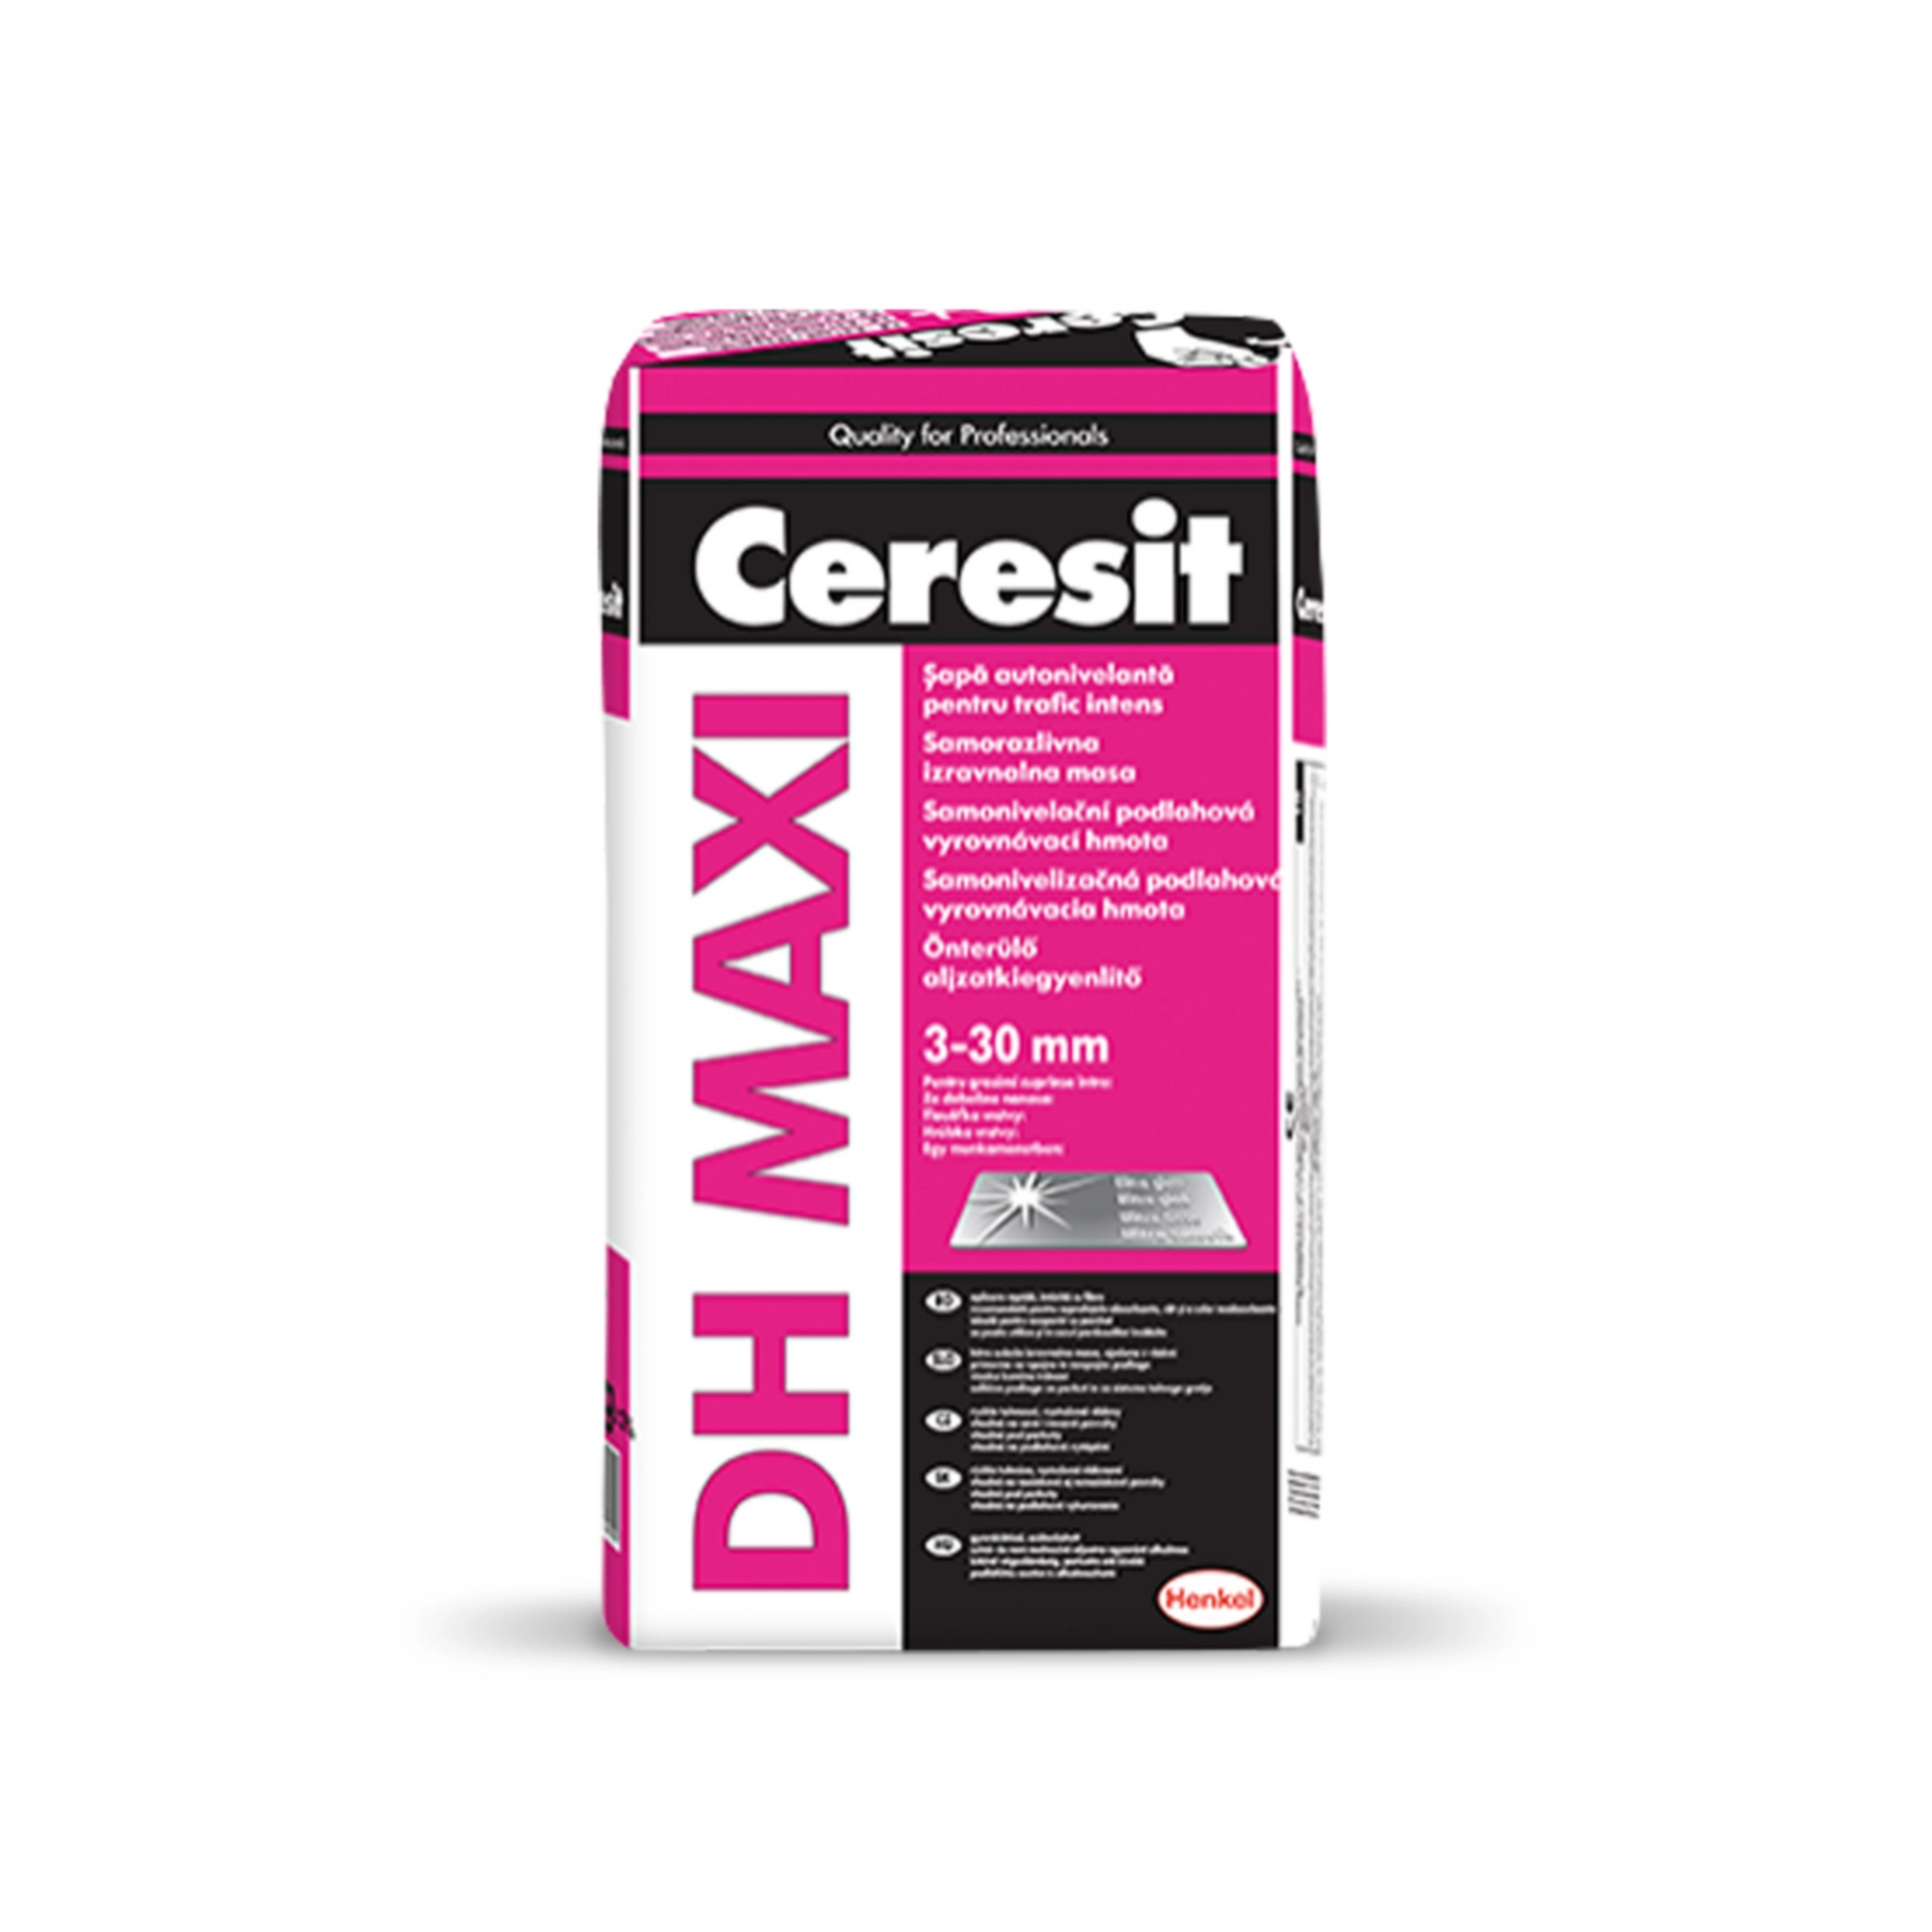 Ceresit DH Maxi Self-Leveling Screed 3-30mm 25kg